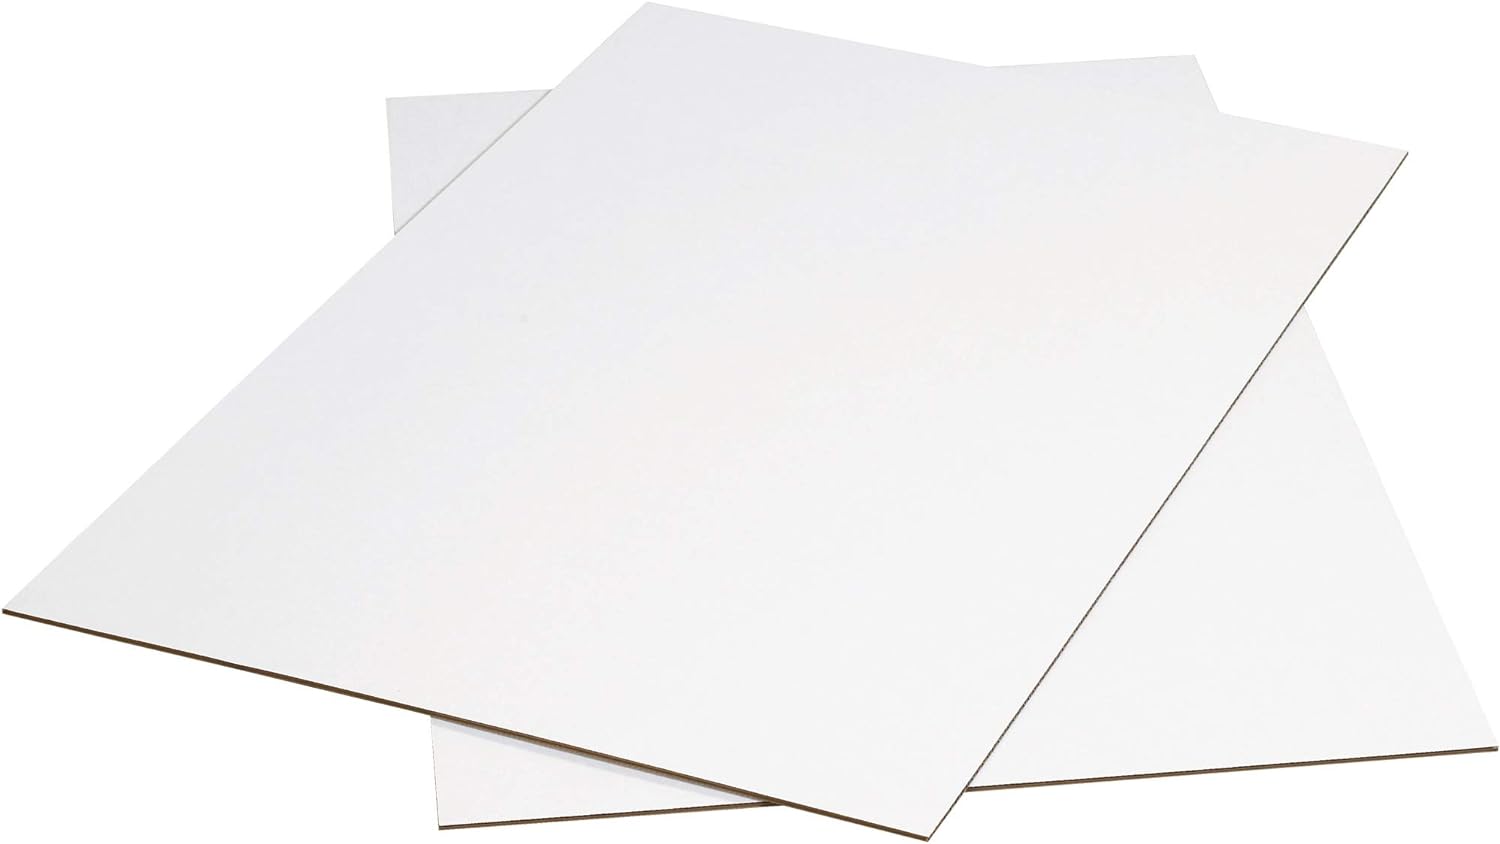 Home & Kitchen, Cardboard sheets 24x36 WholeSale - Price List, Bulk Buy at